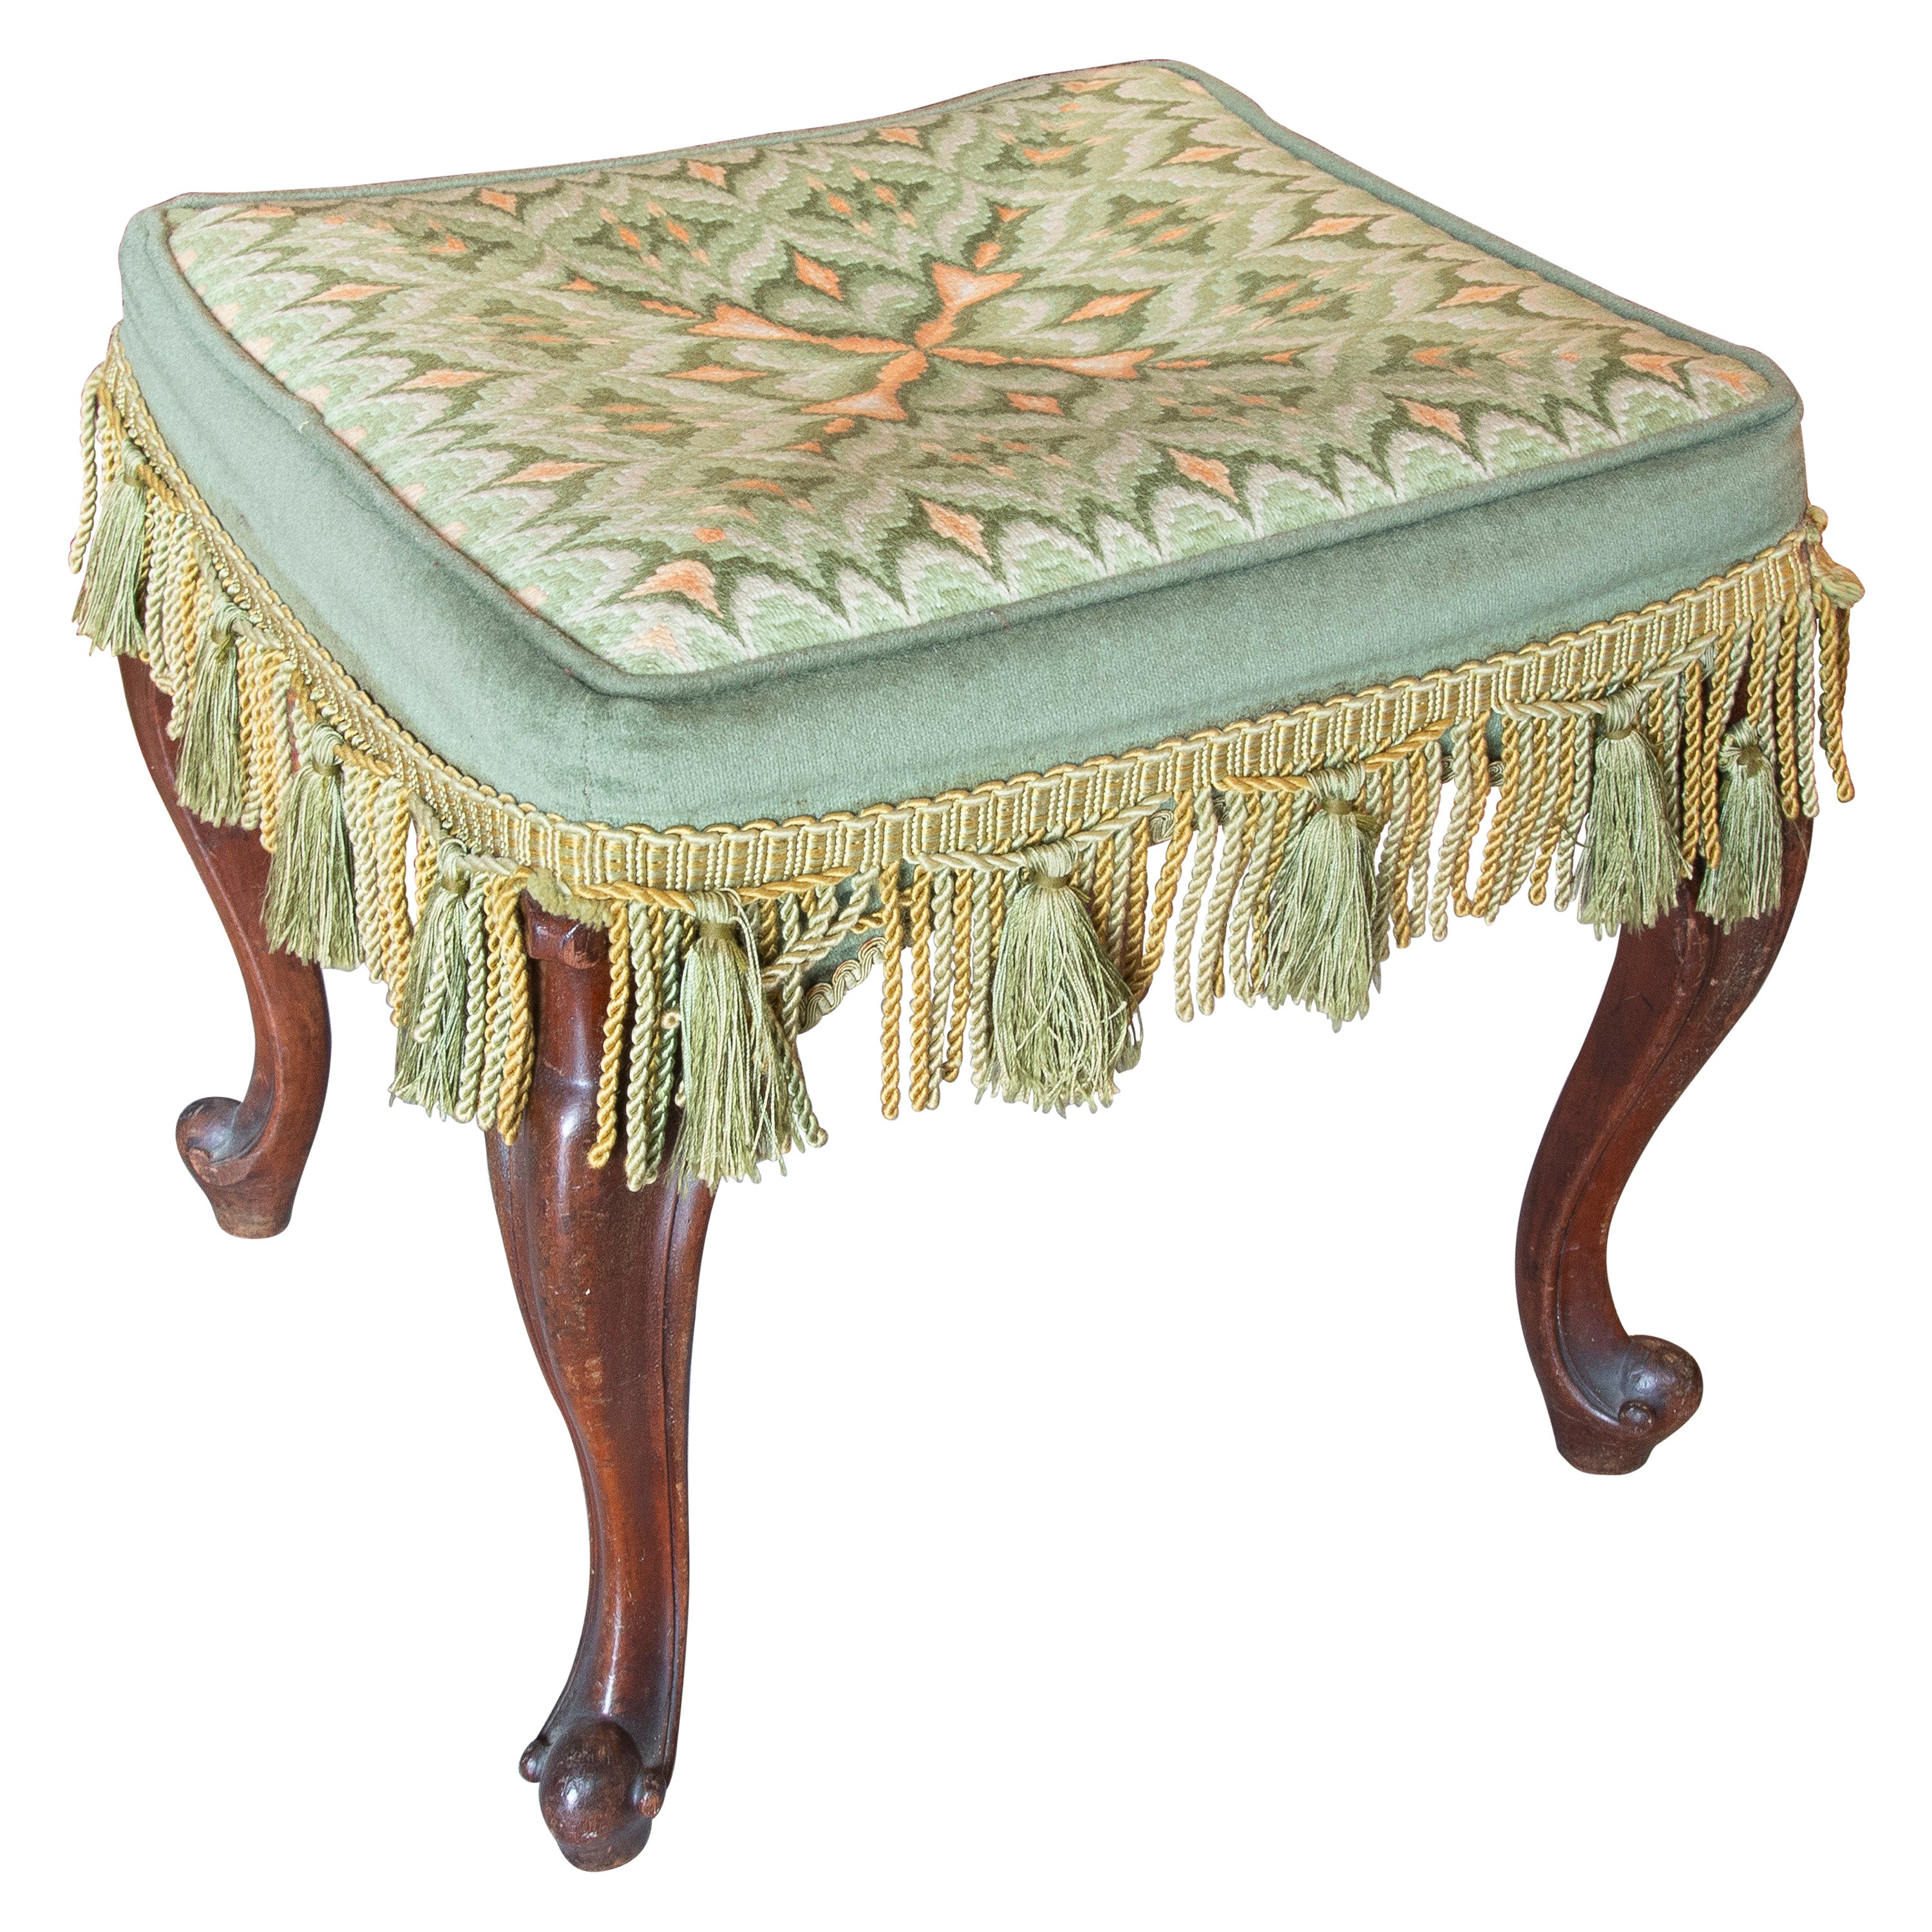 19th Century English Mahogany Stool with Embroidered Seat  For Sale